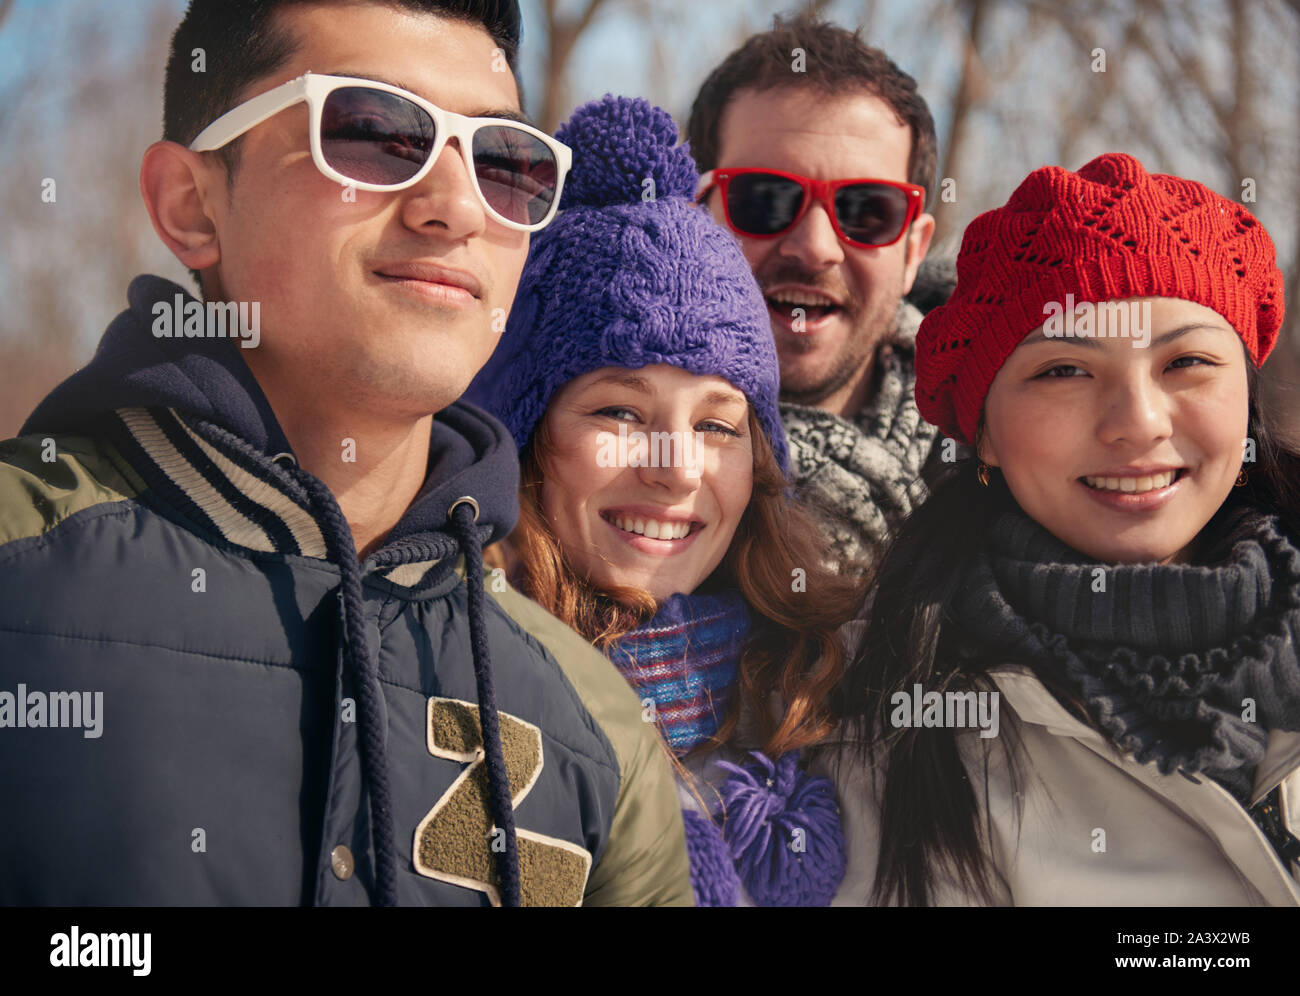 Group of millenial young adult friends photographing each other with a smartphone in a snow filled park Stock Photo